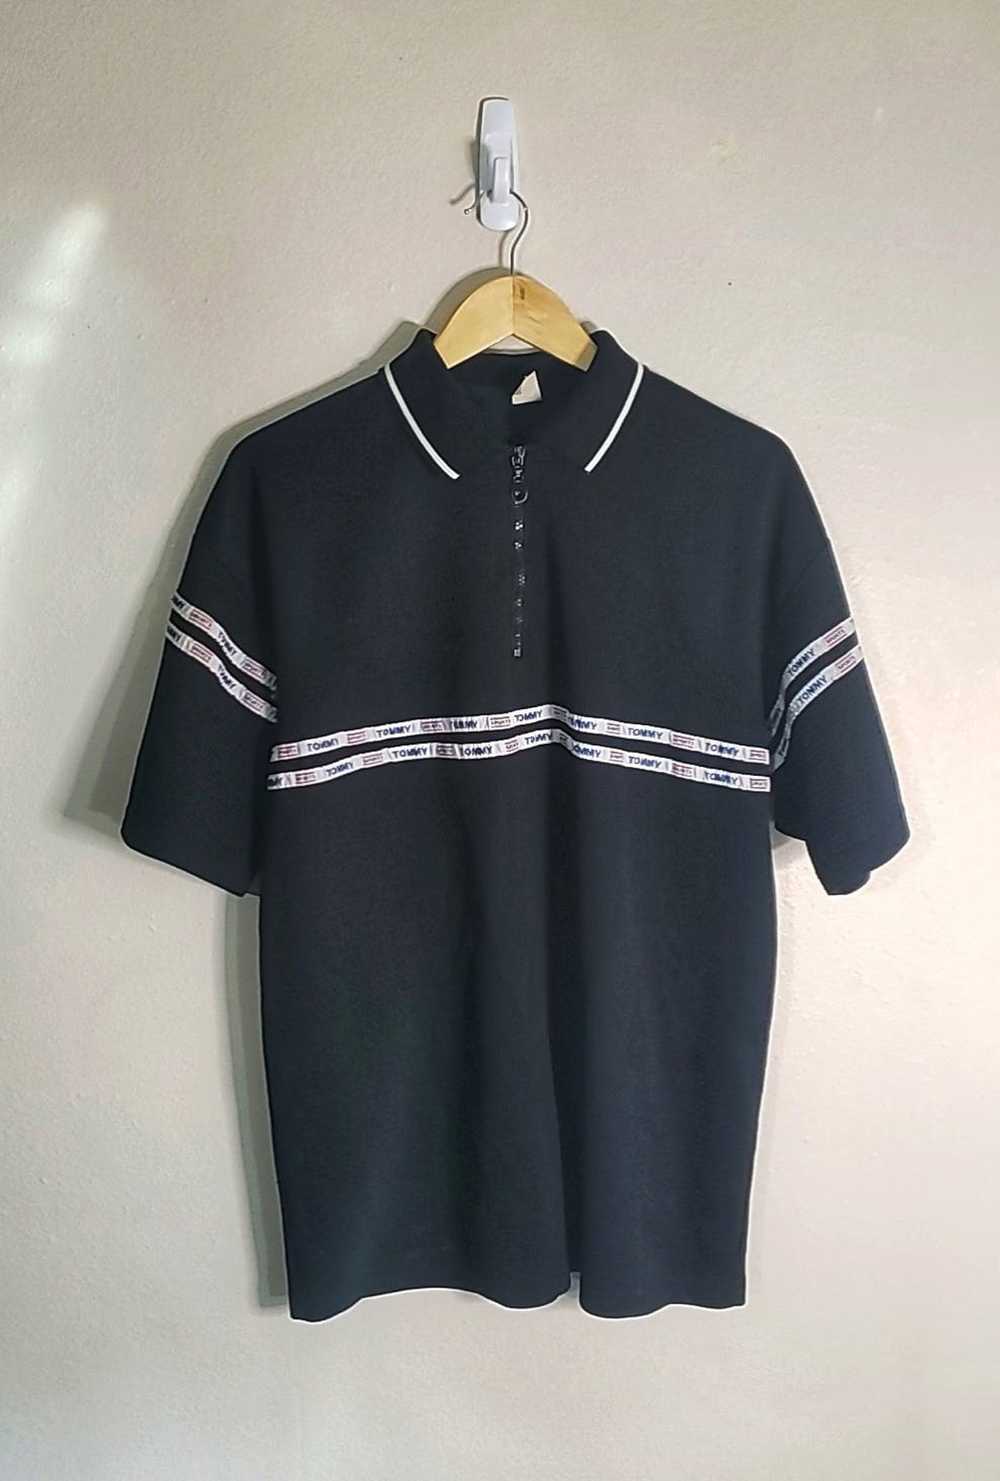 Tommy Hilfiger Vintage Tommy Sports Mesh Polo - image 3